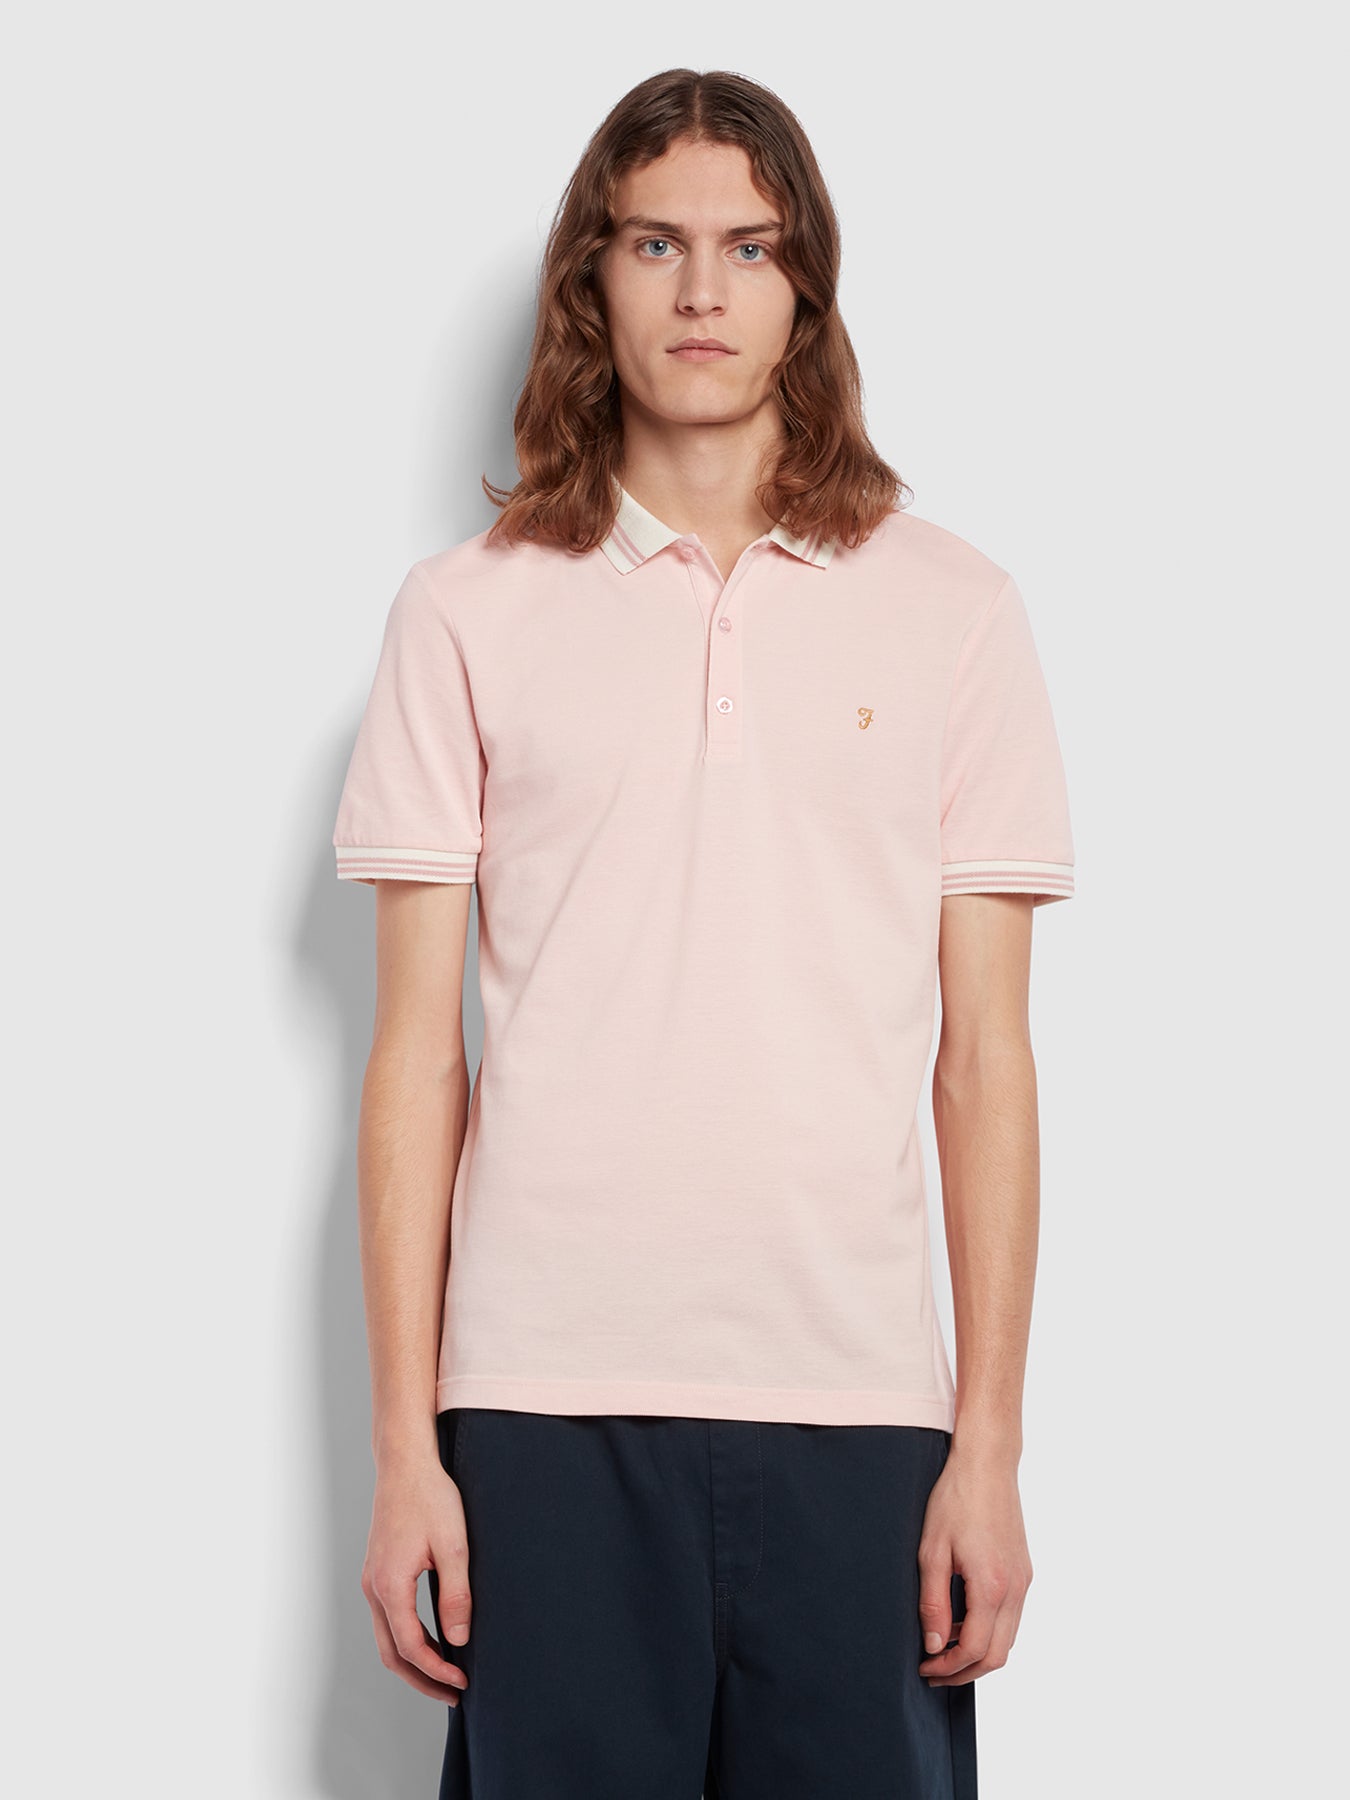 View Stanton Slim Fit Short Sleeve Tipped Polo Shirt In Mid Pink information